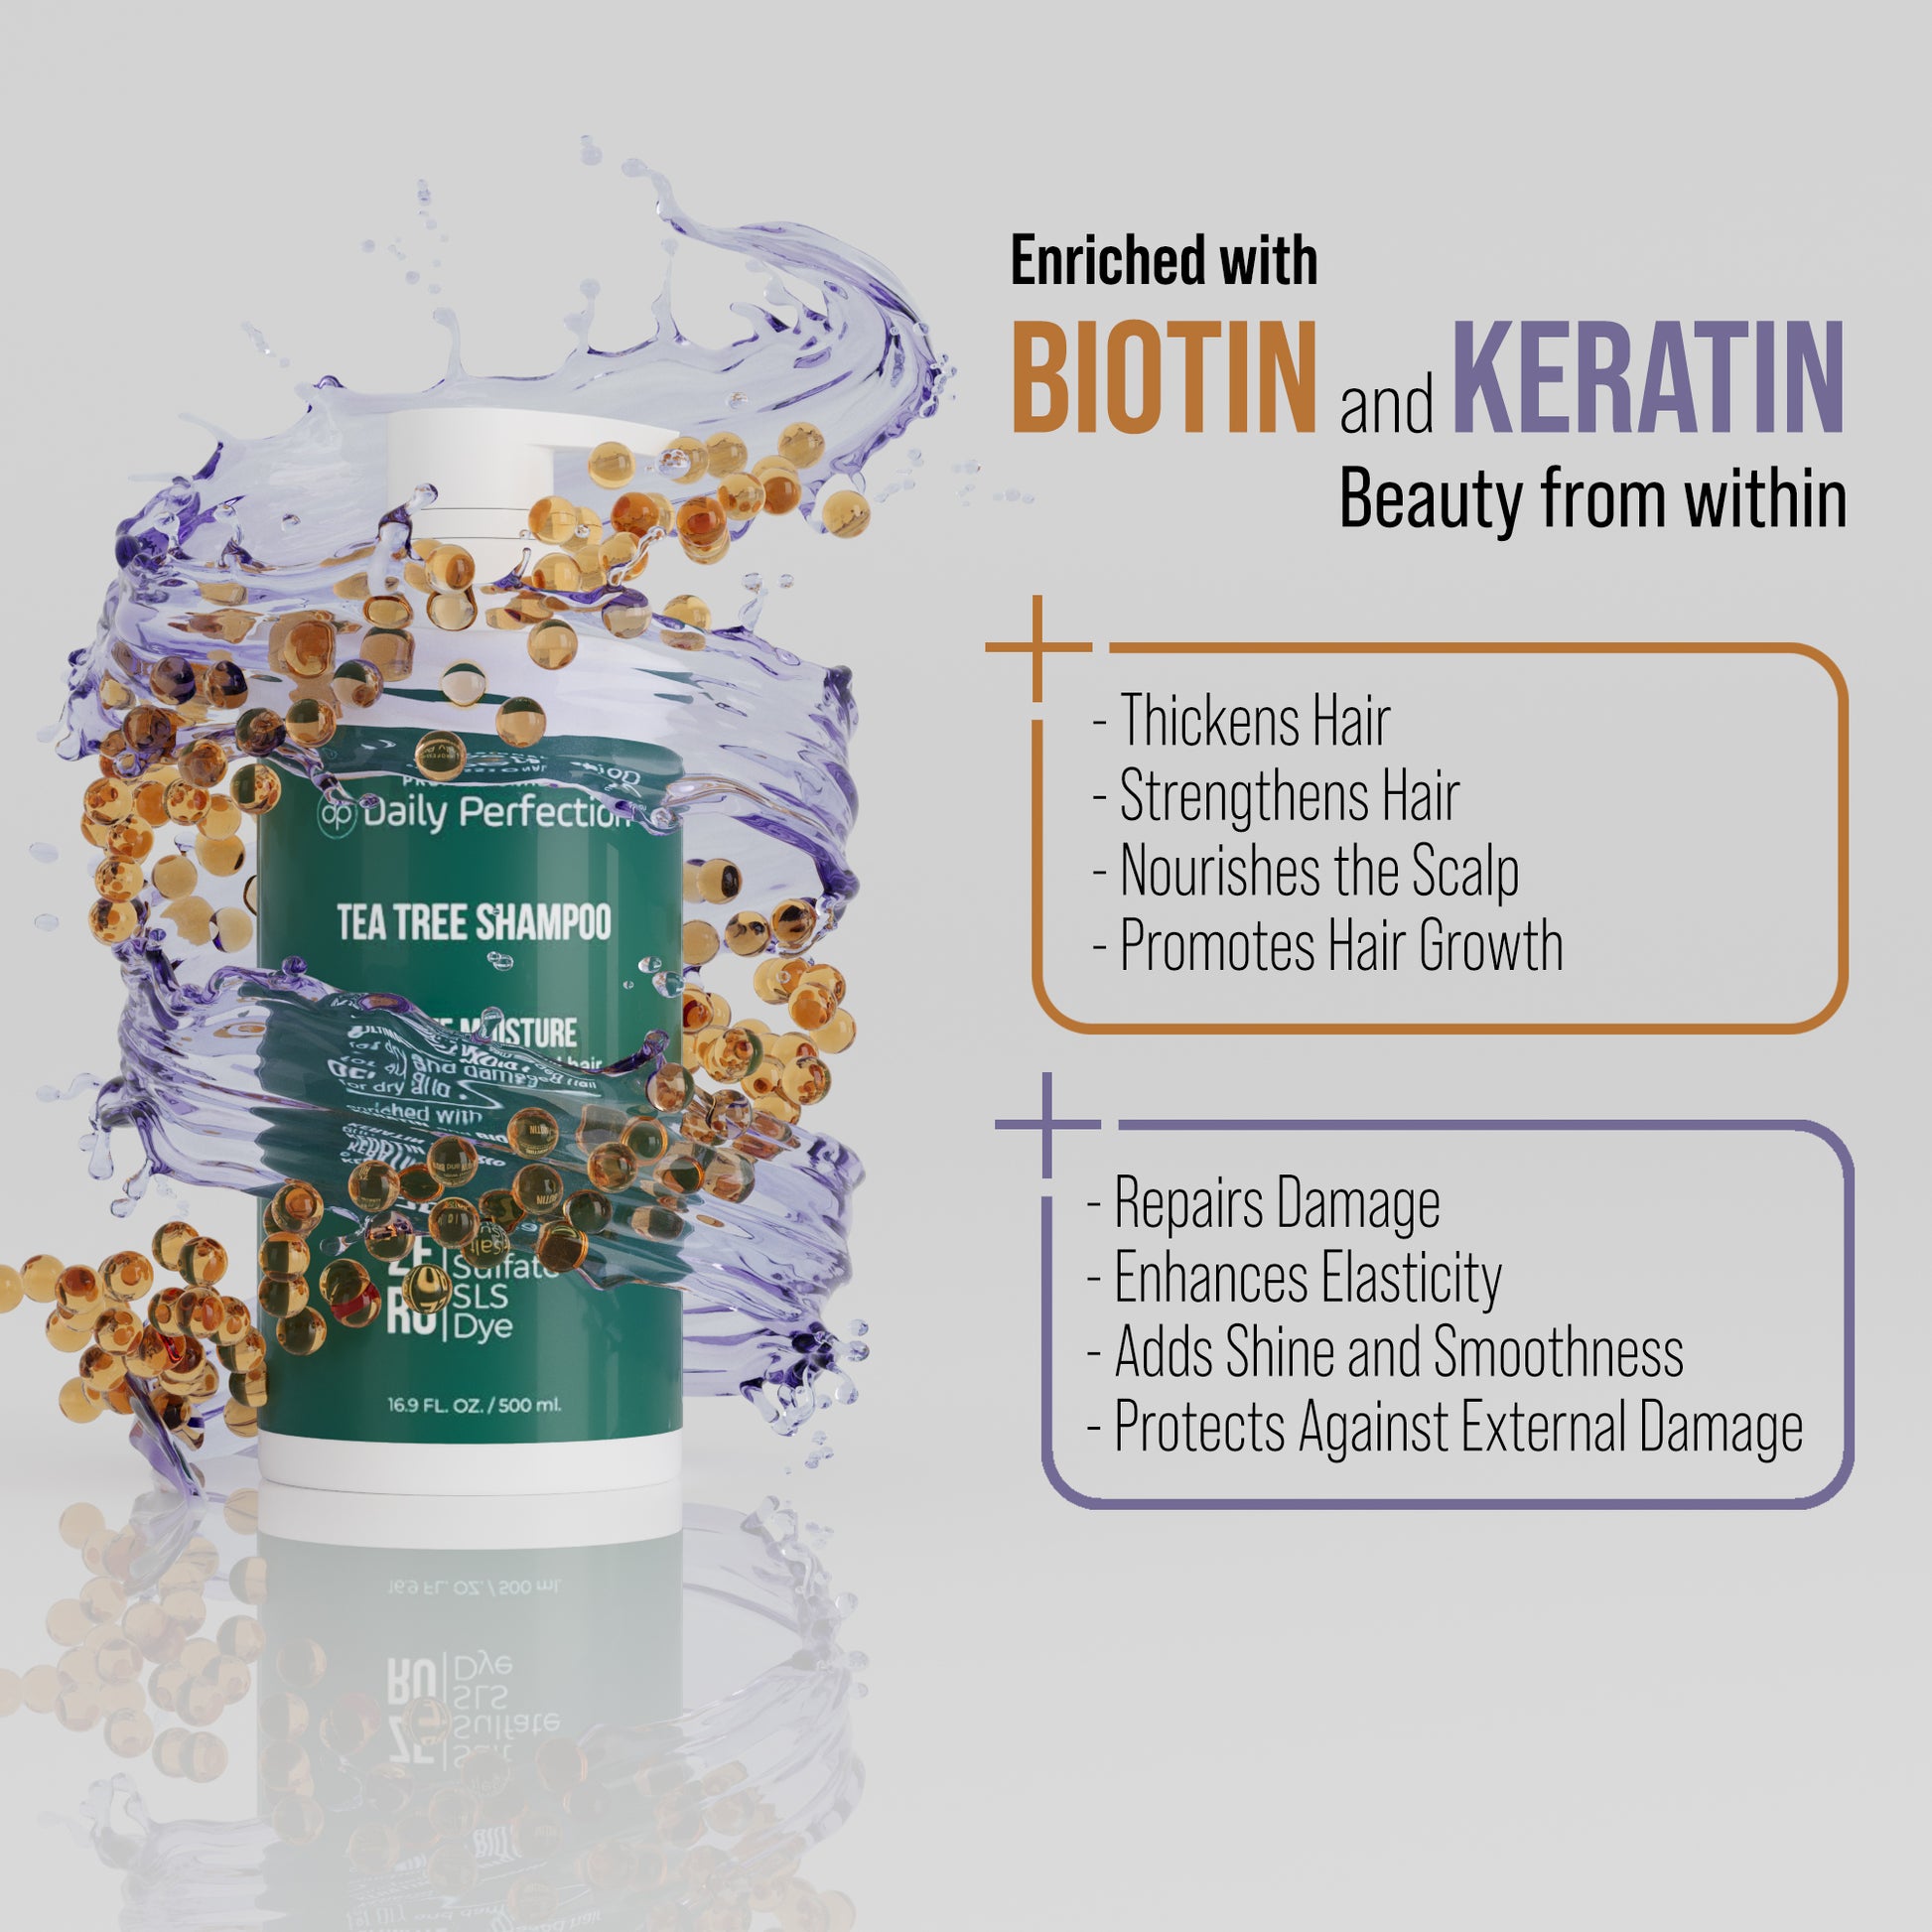 infographic explains the benefits of biotin and kertain boosts which are used in Daily Perfection Tea-Tree Shampoo